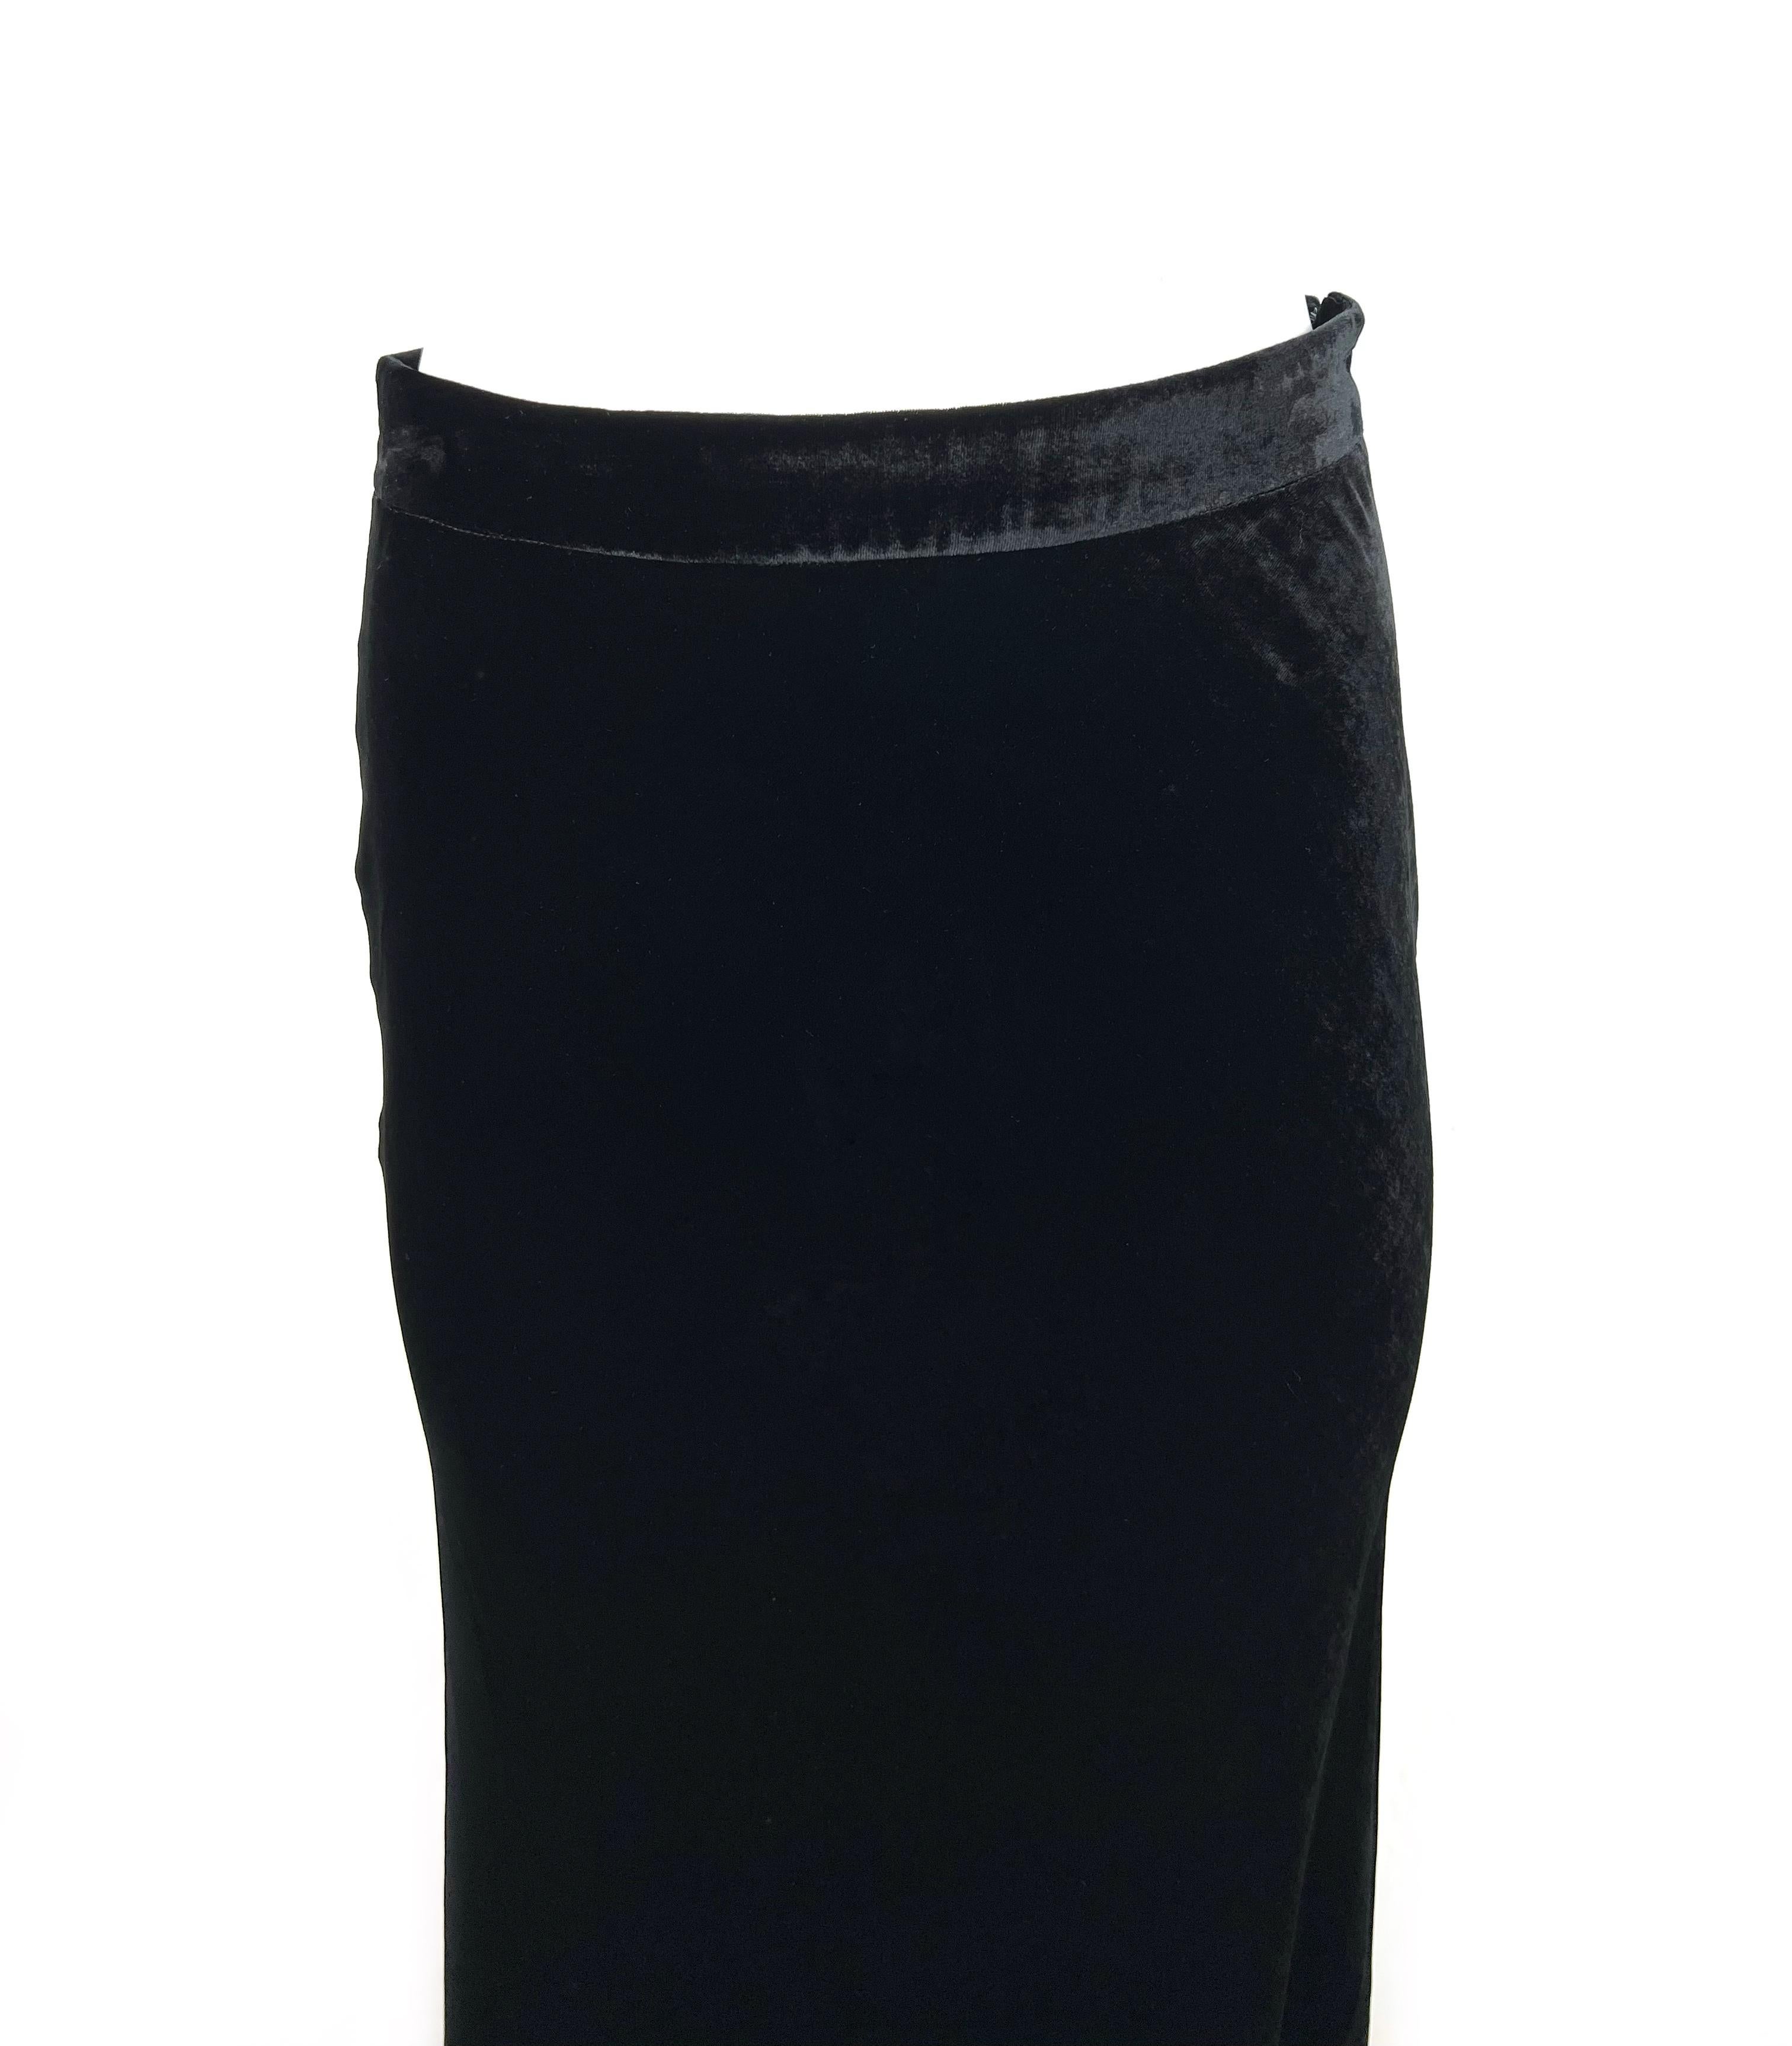 Product details:

The skirt features floor length with side zip closure.